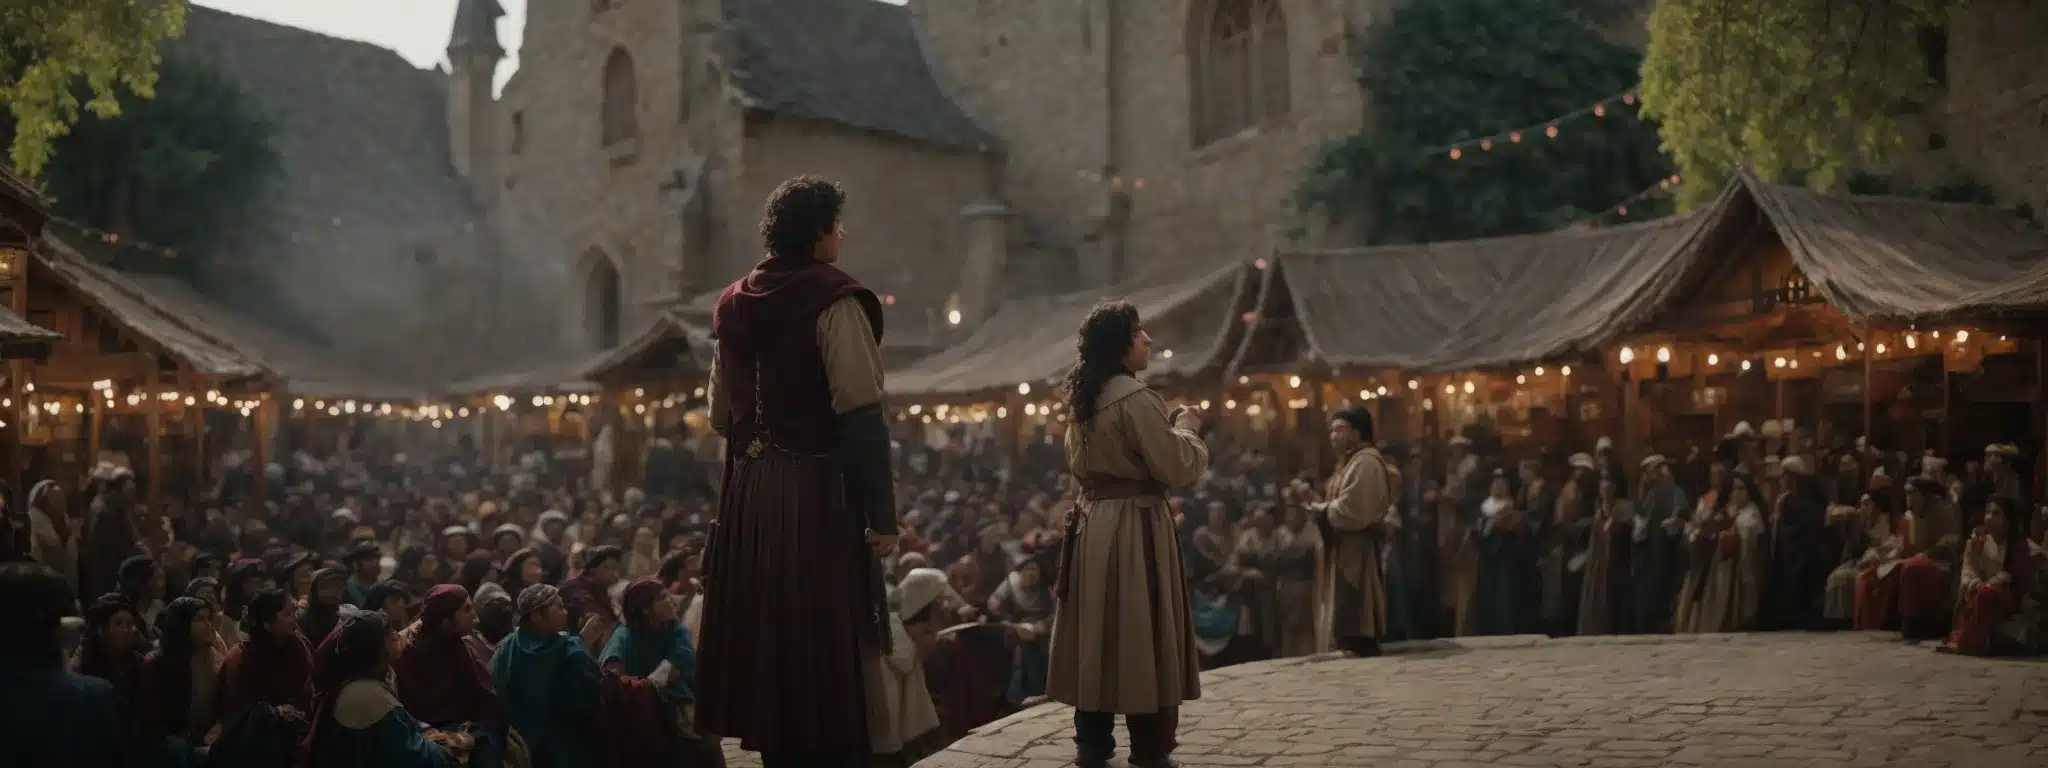 A Bard Confidently Addressing An Enchanted Audience In A Vibrant Medieval Marketplace.